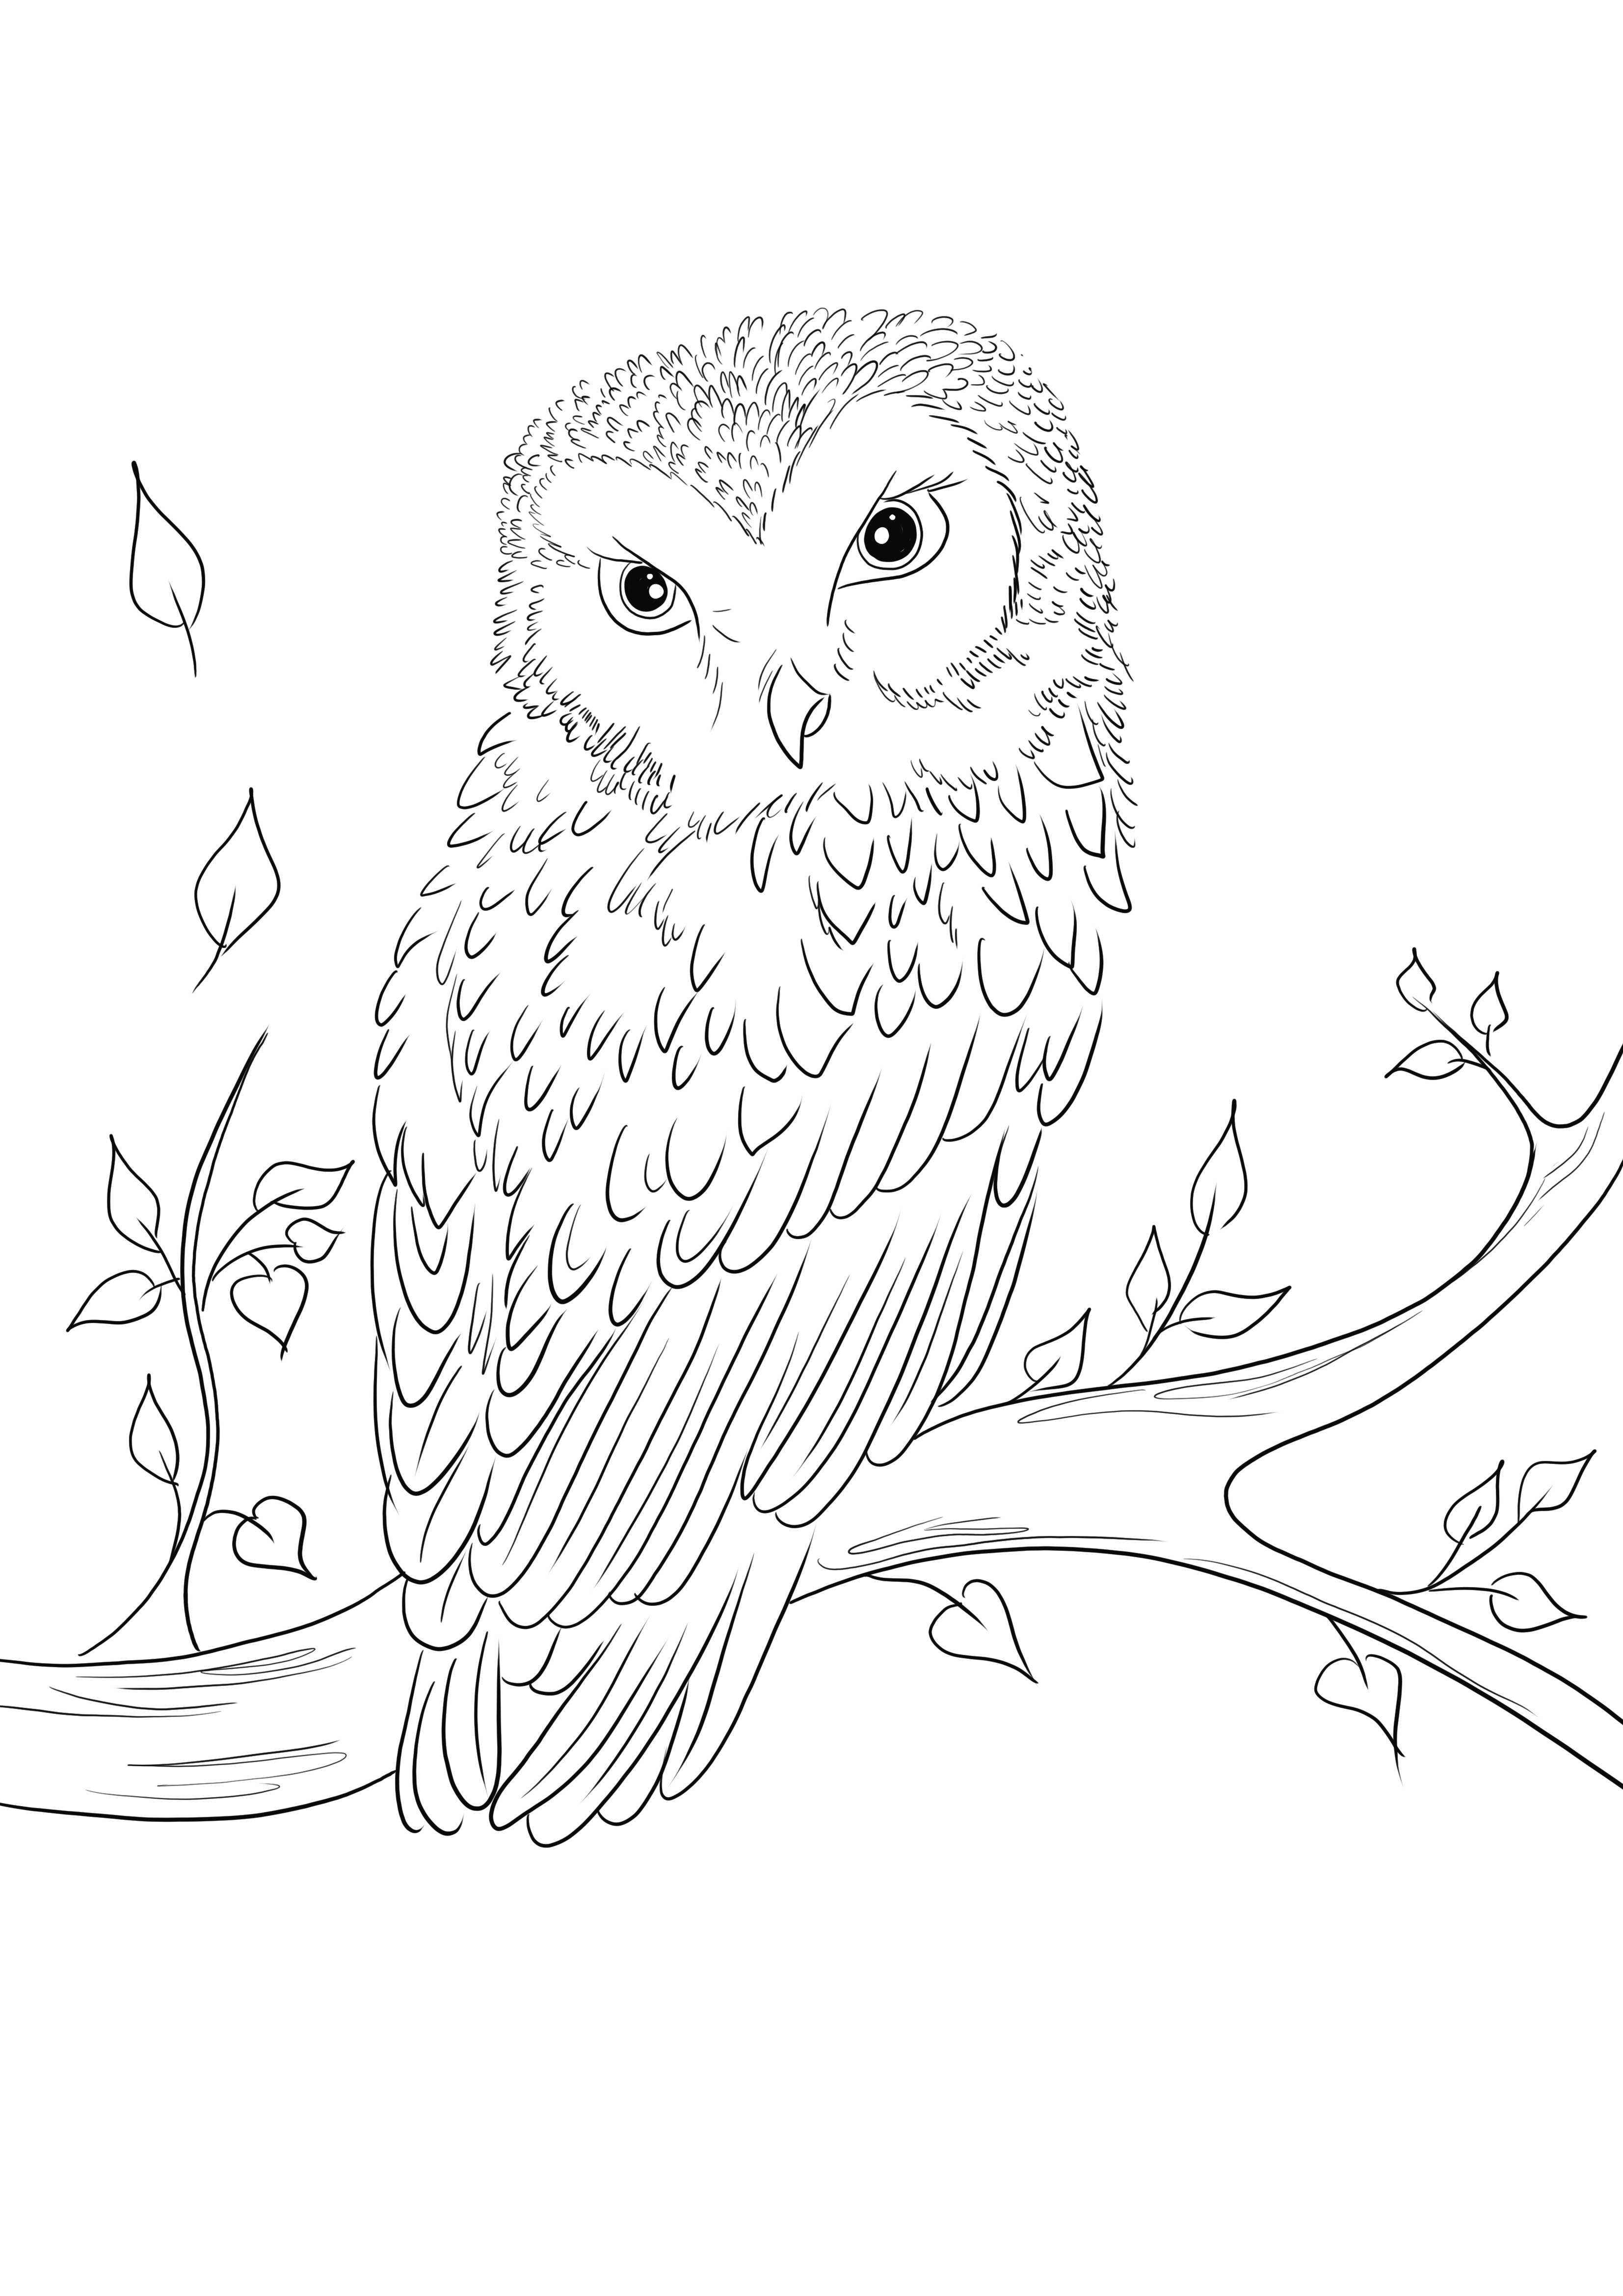 Our gorgeous Owl on a tree is ready to be printed for free and colored